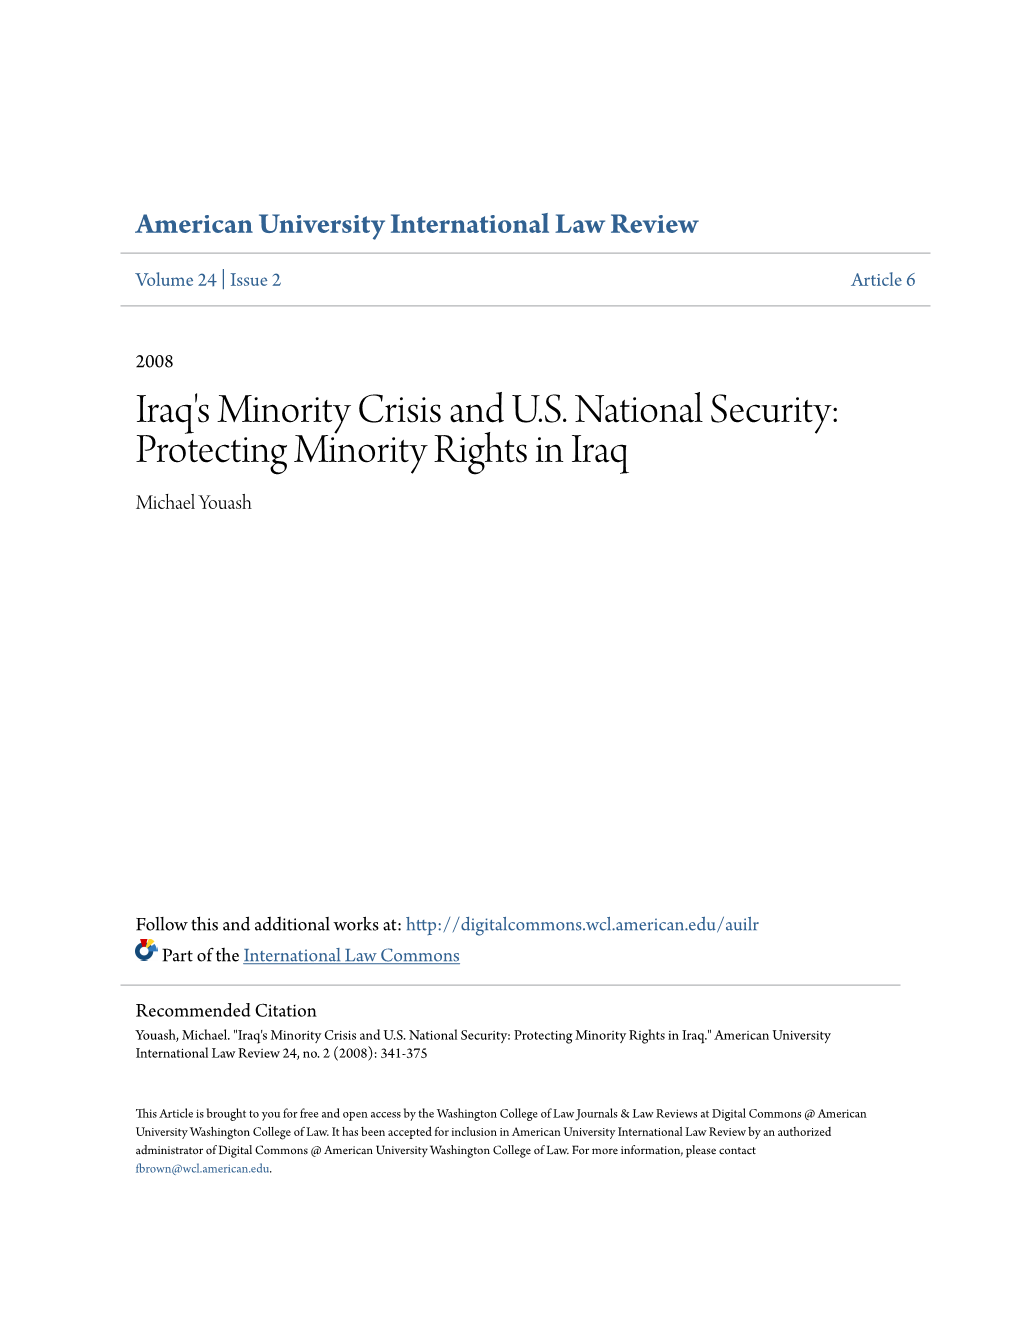 Protecting Minority Rights in Iraq Michael Youash